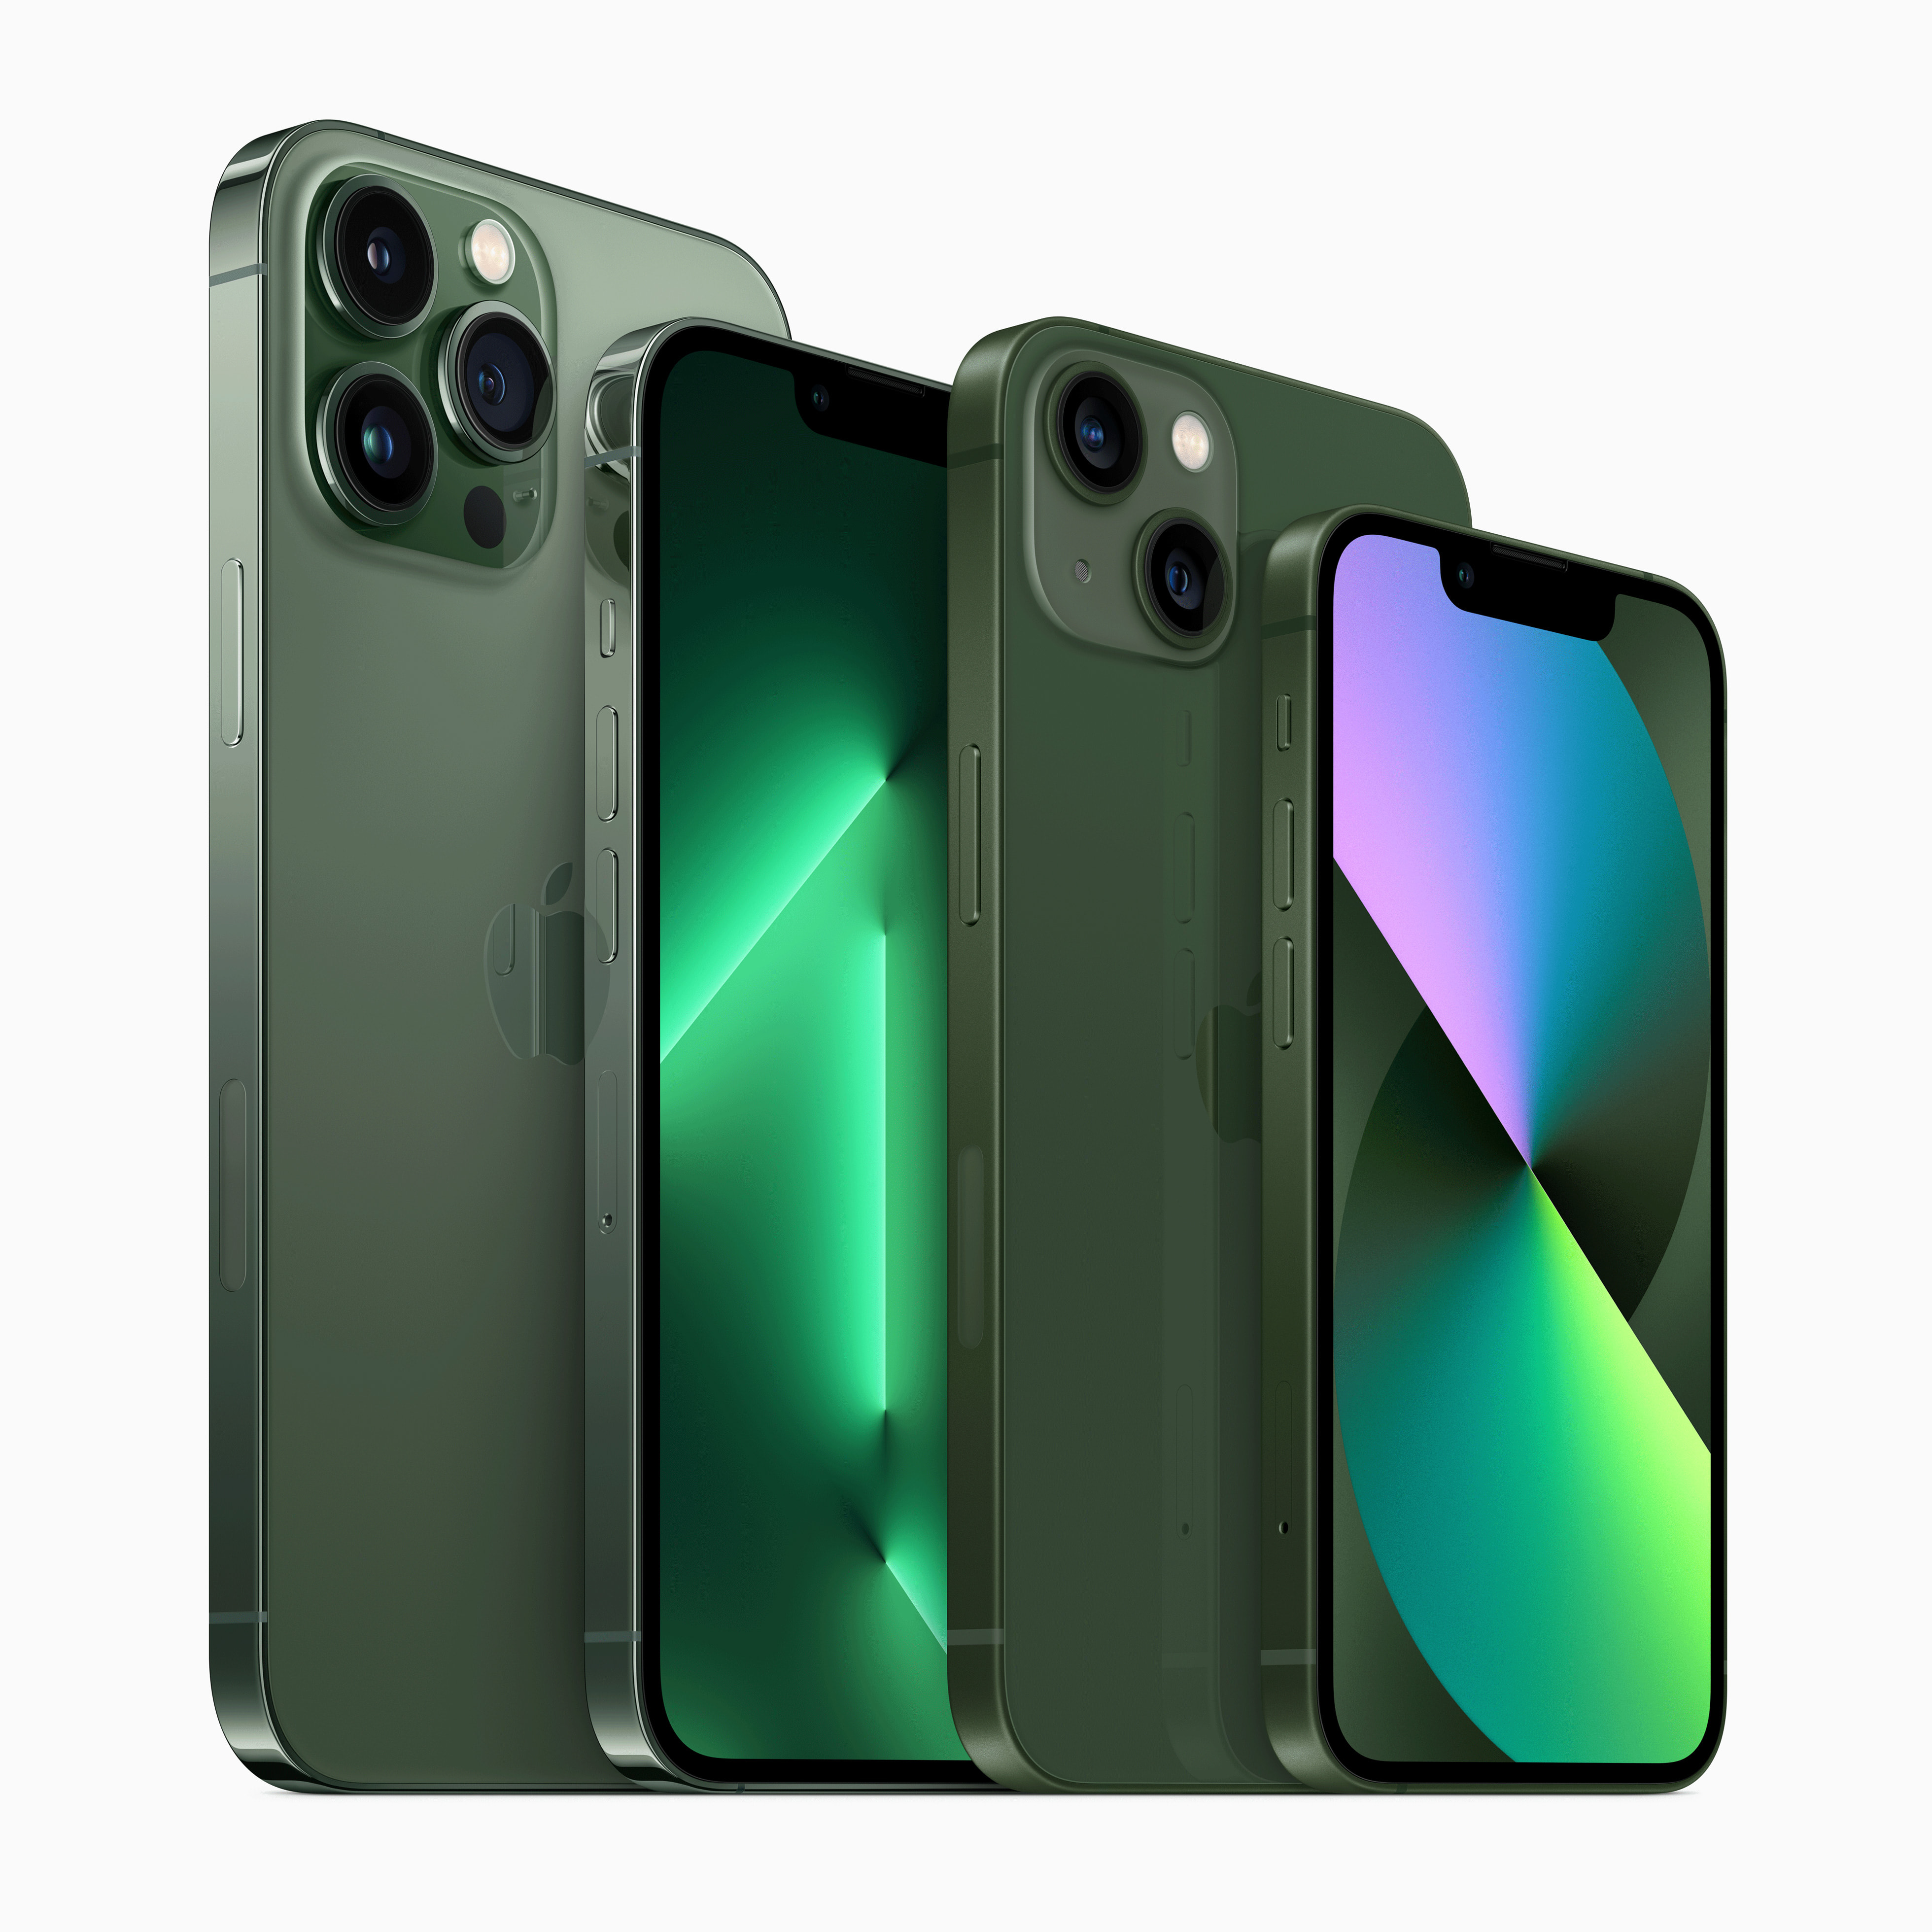 Is the green iPhone 13 pretty?